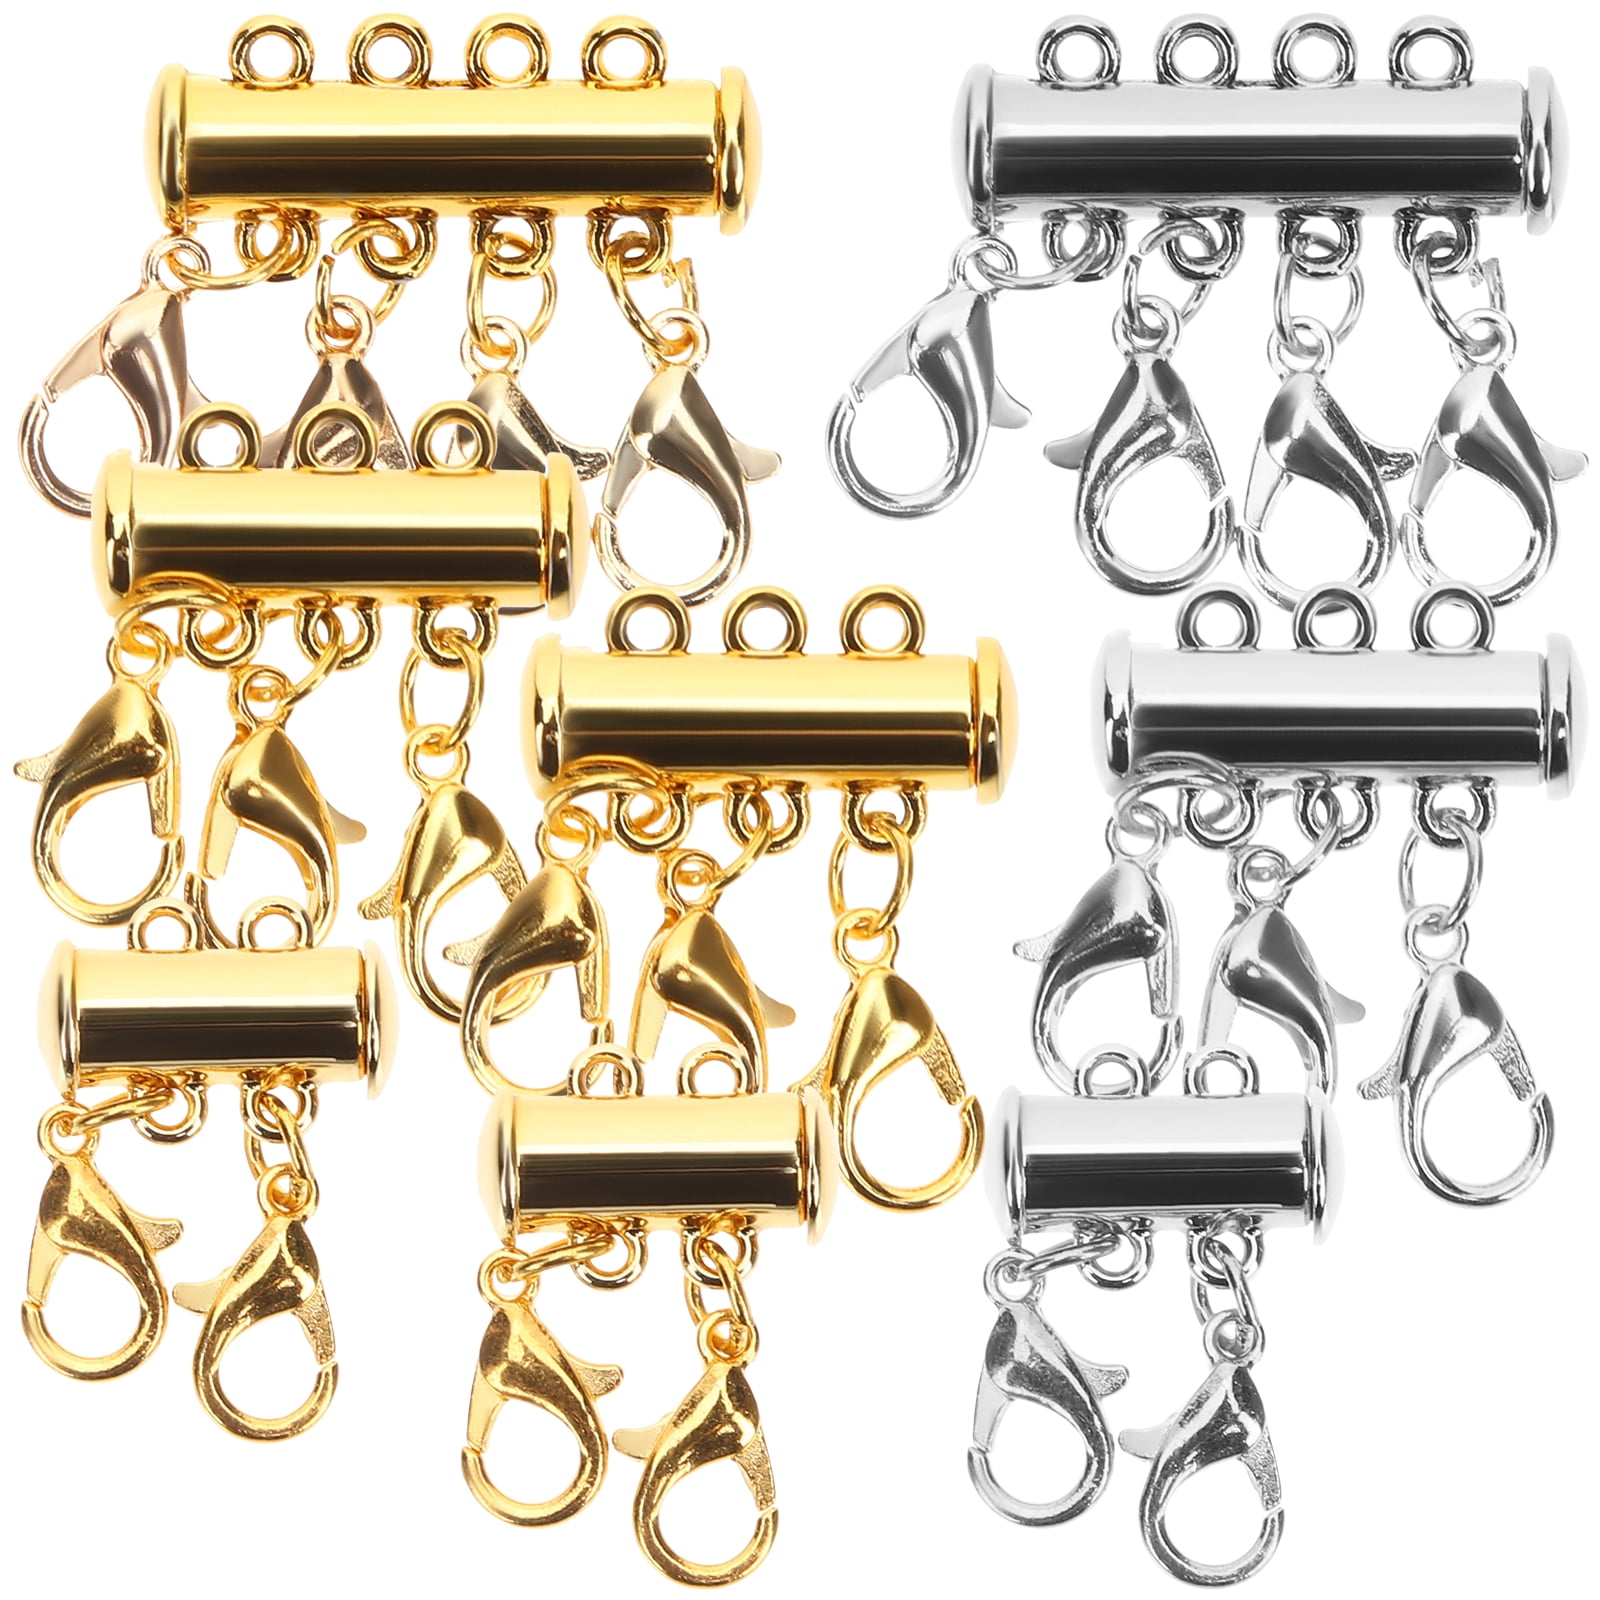 8PCS Creative Jewelry Clasps Jewelry Making Clasps Magnetic Necklace Clasp